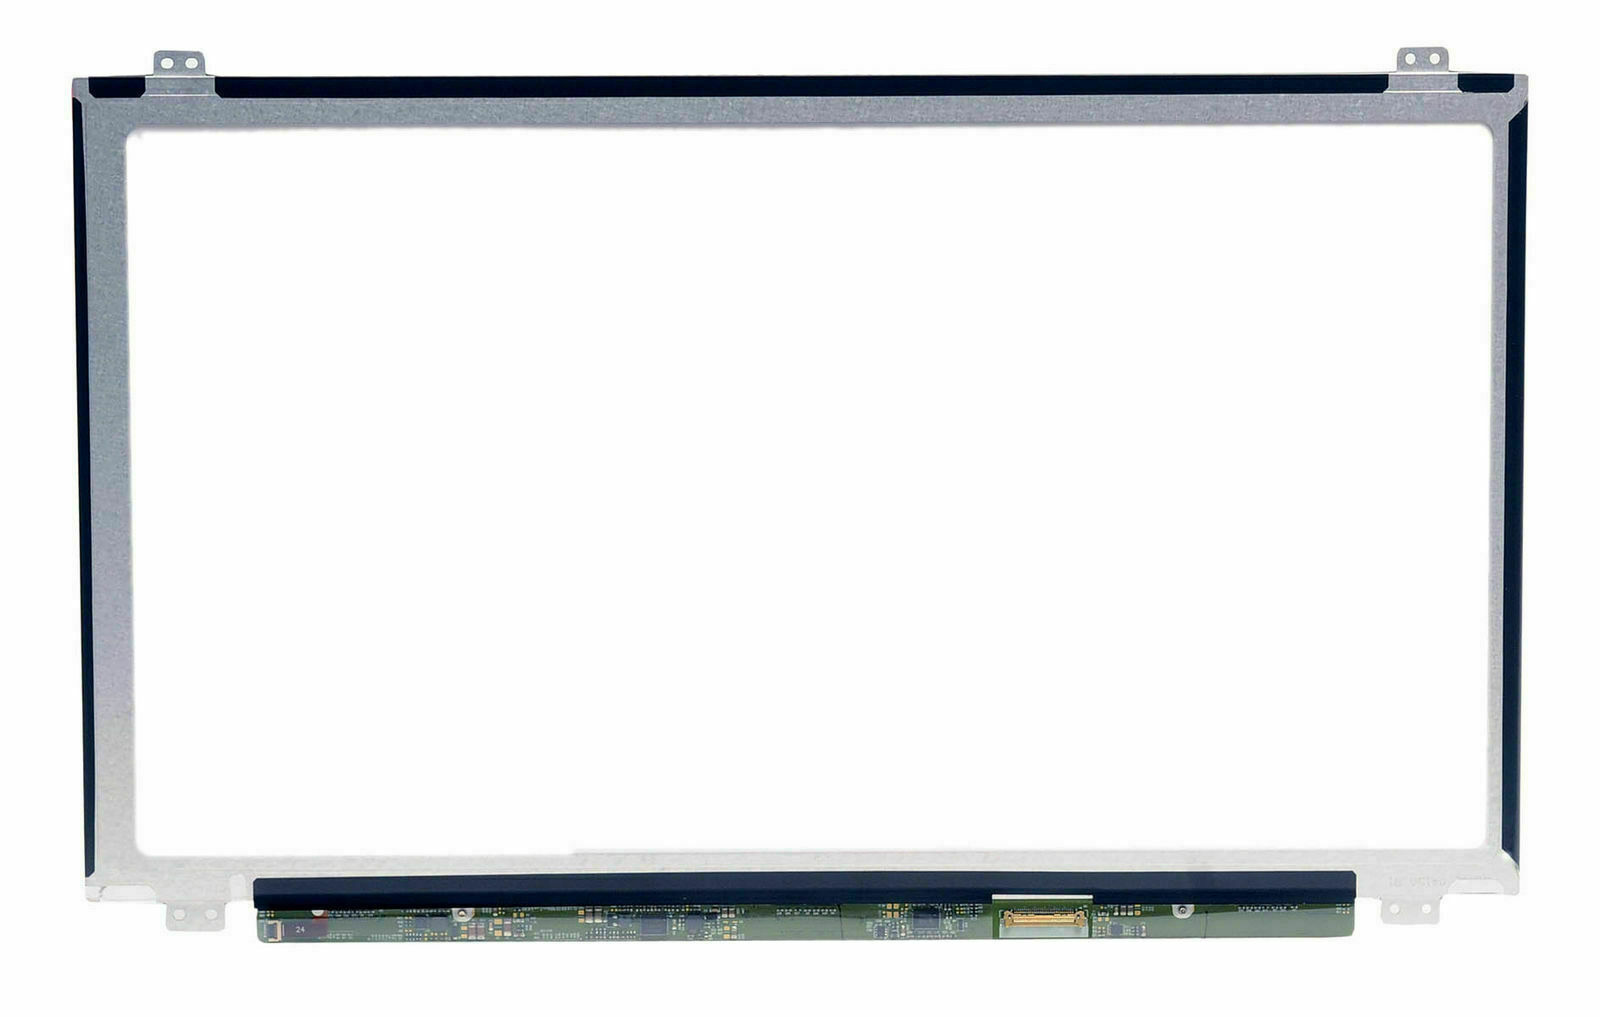 Primary image for ASUS X550V LCD Screen Matte HD 1366x768 Display 15.6"